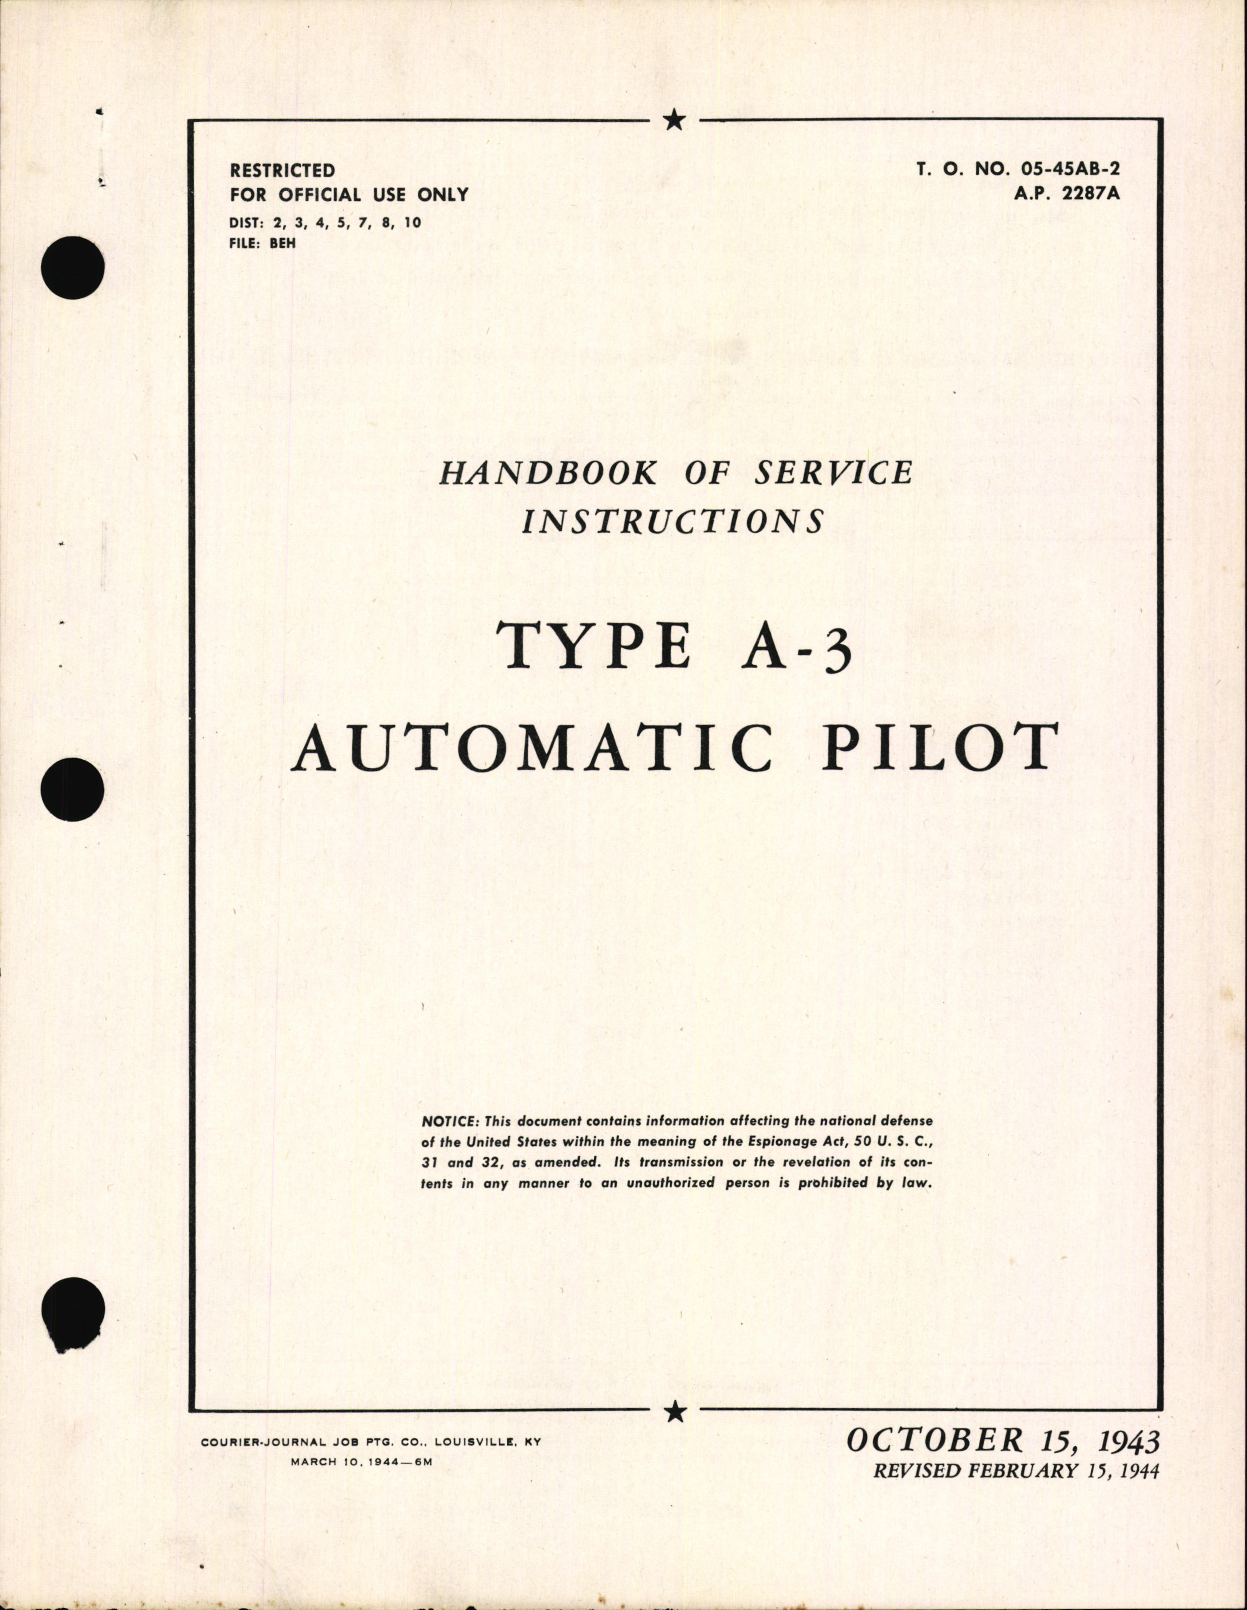 Sample page 5 from AirCorps Library document: Service Instructions for Automatic Pilot Type A-3